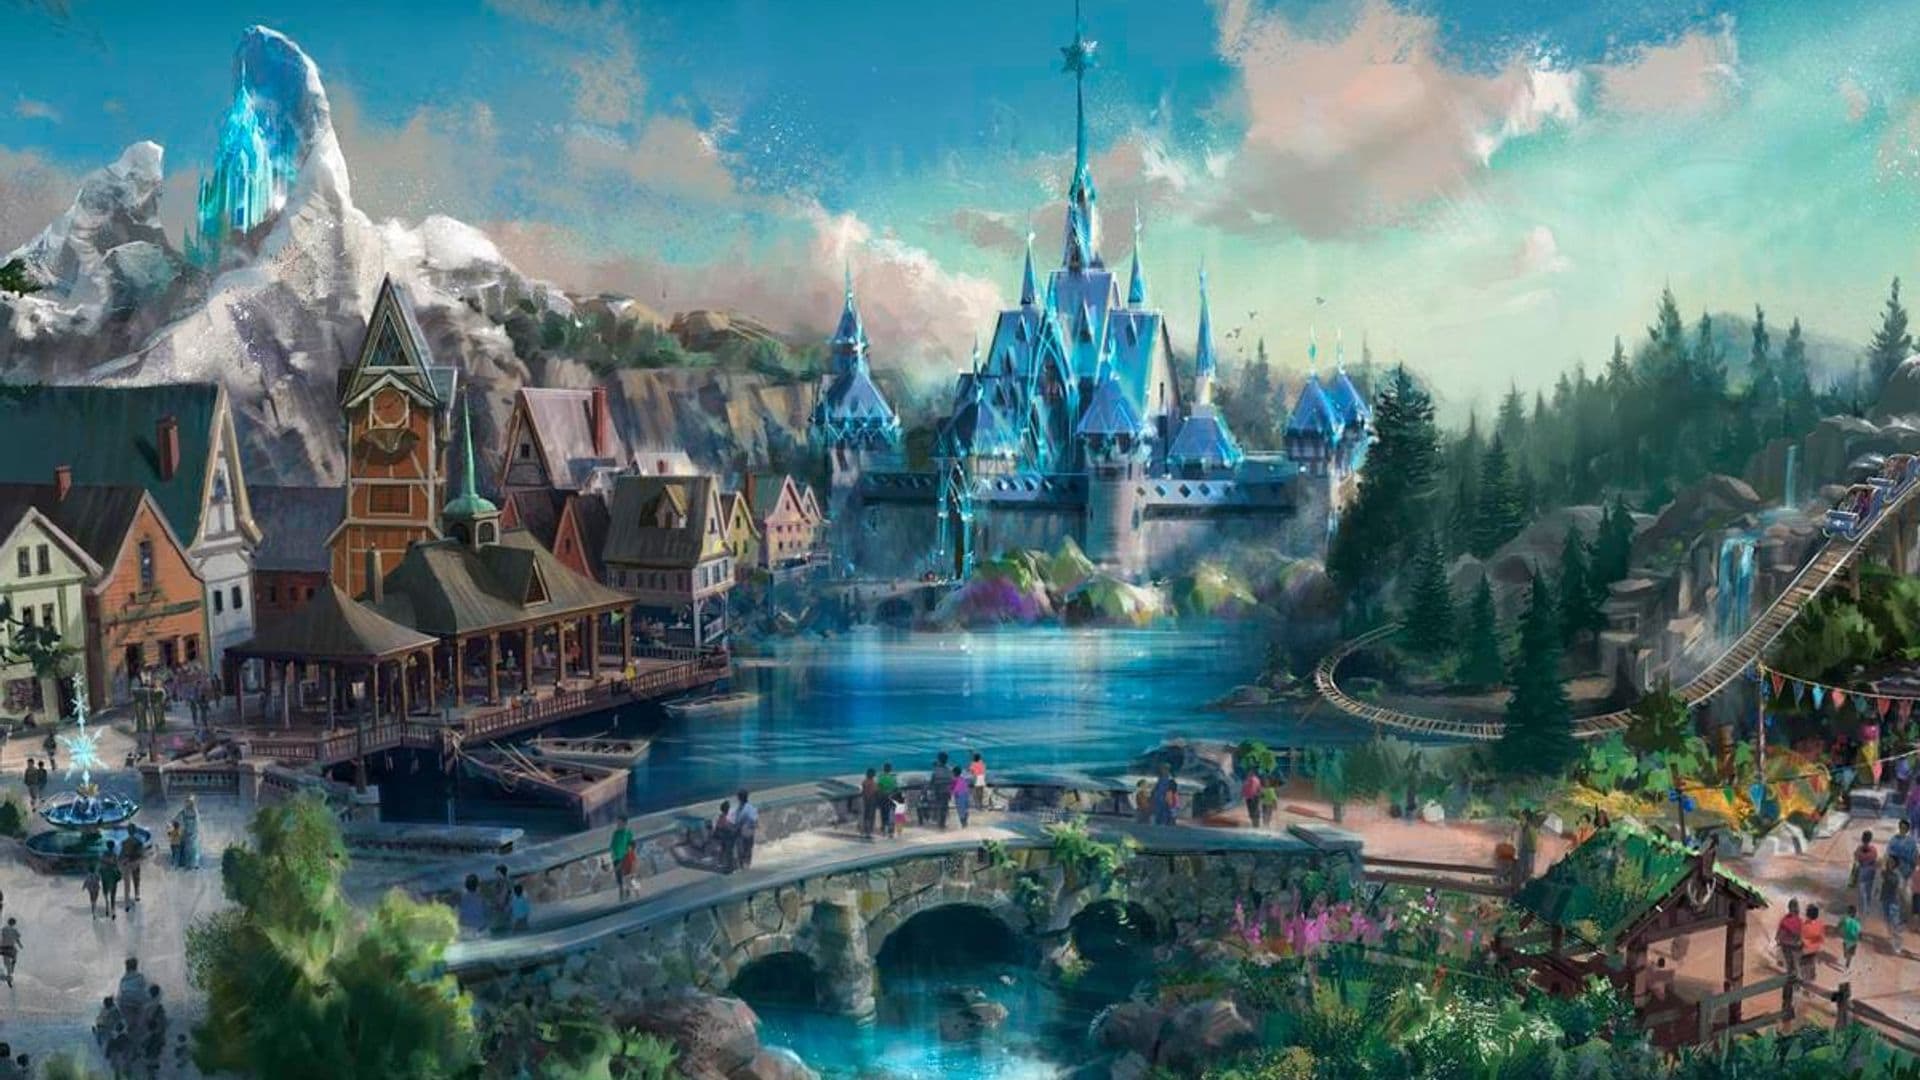 Book a trip to Arendelle! A Frozen-themed land to open at theme park this year